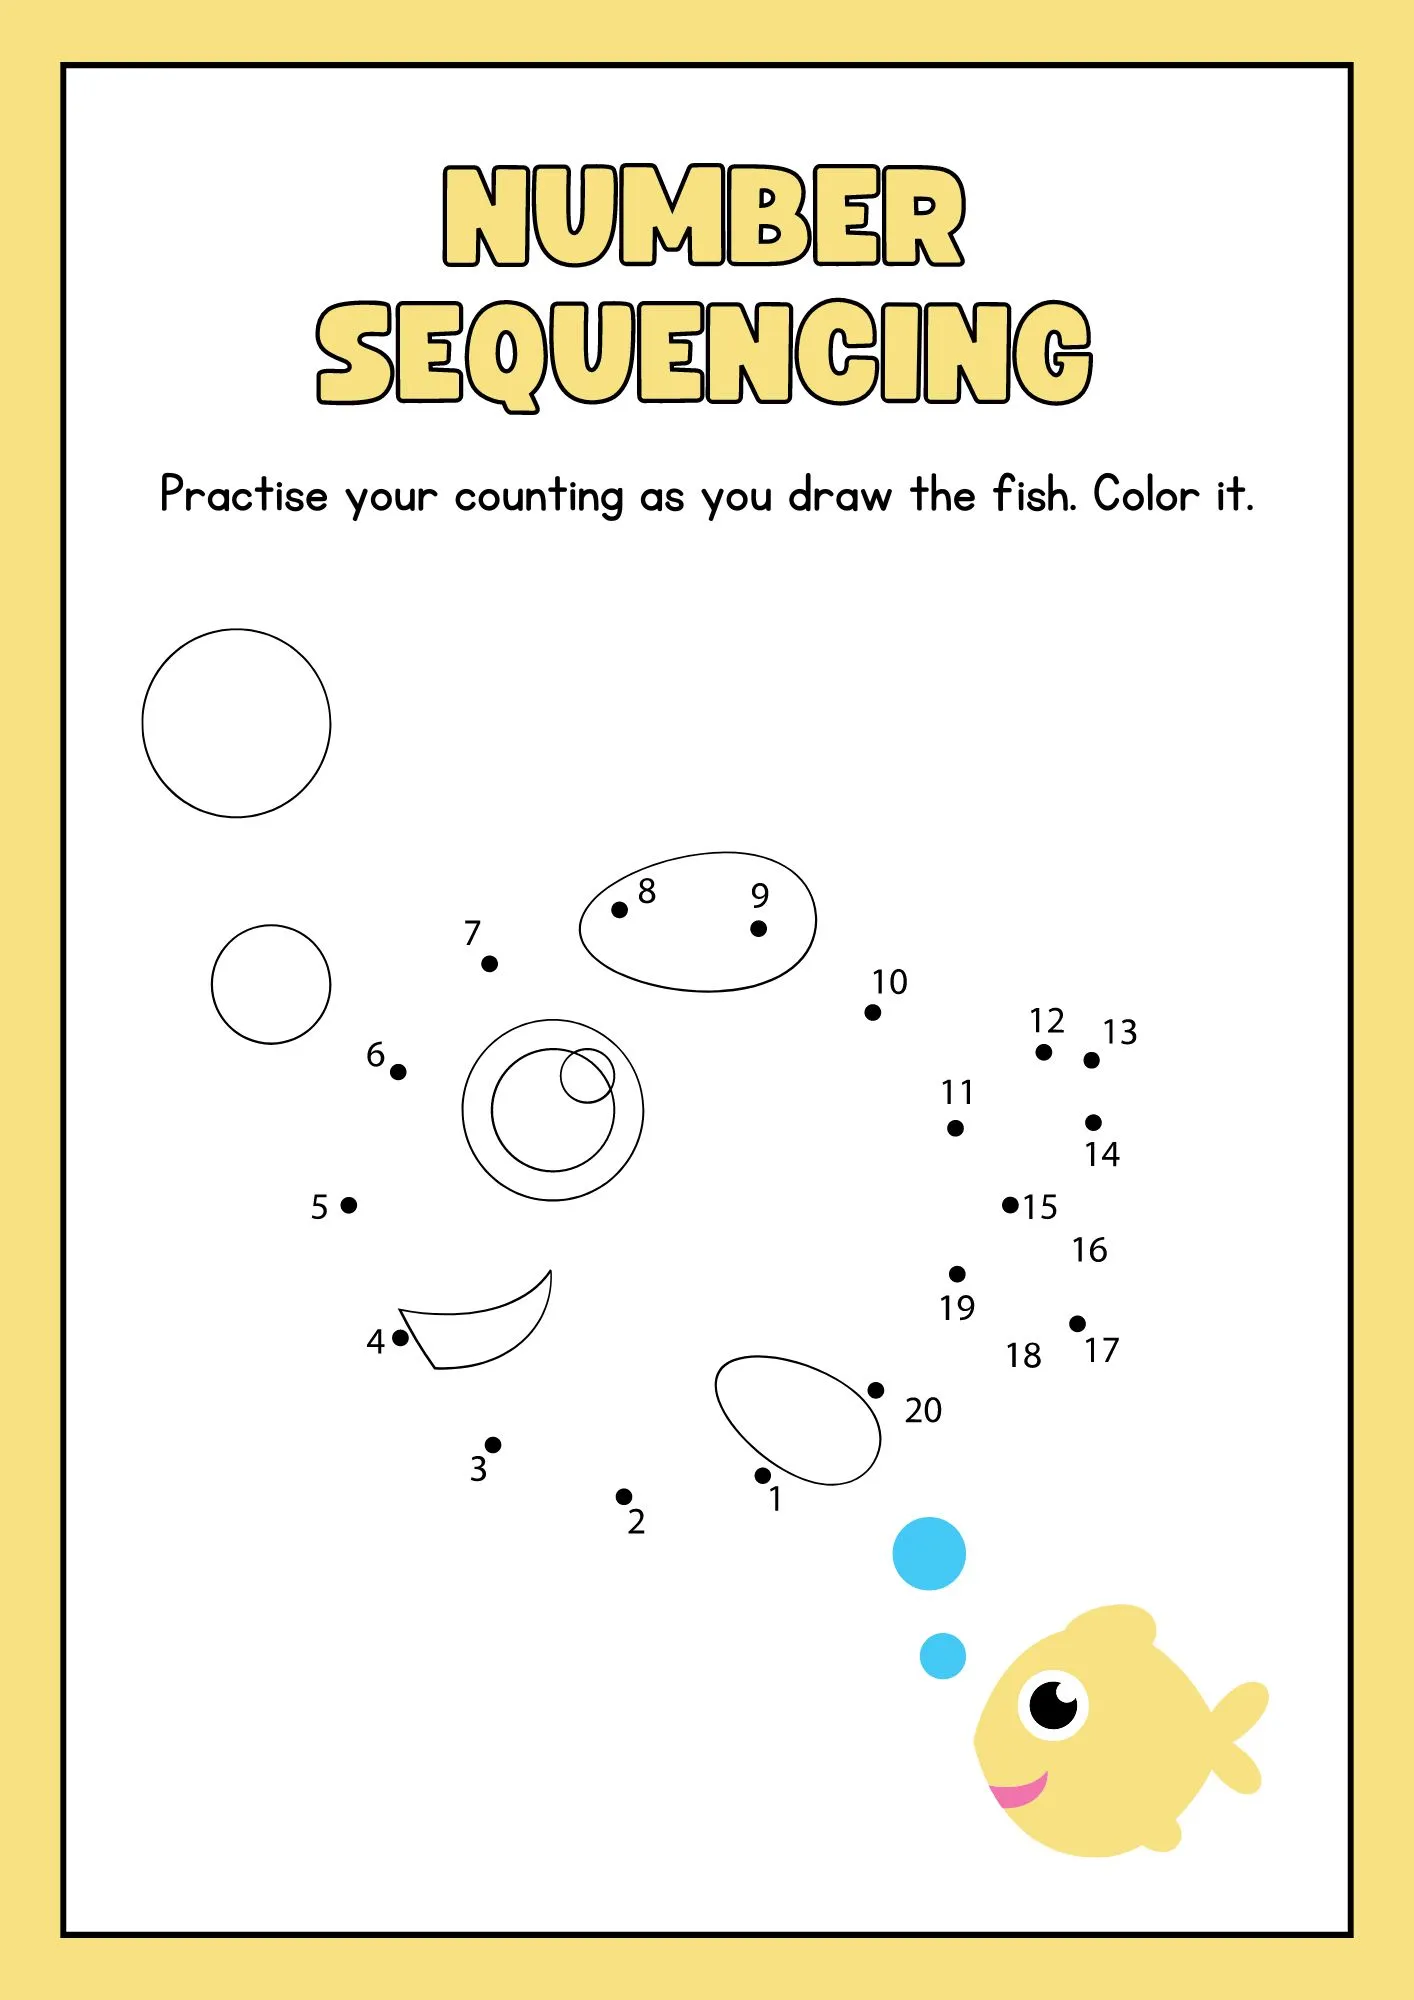 Number Sequencing Activity Worksheet trace and color the (fish)